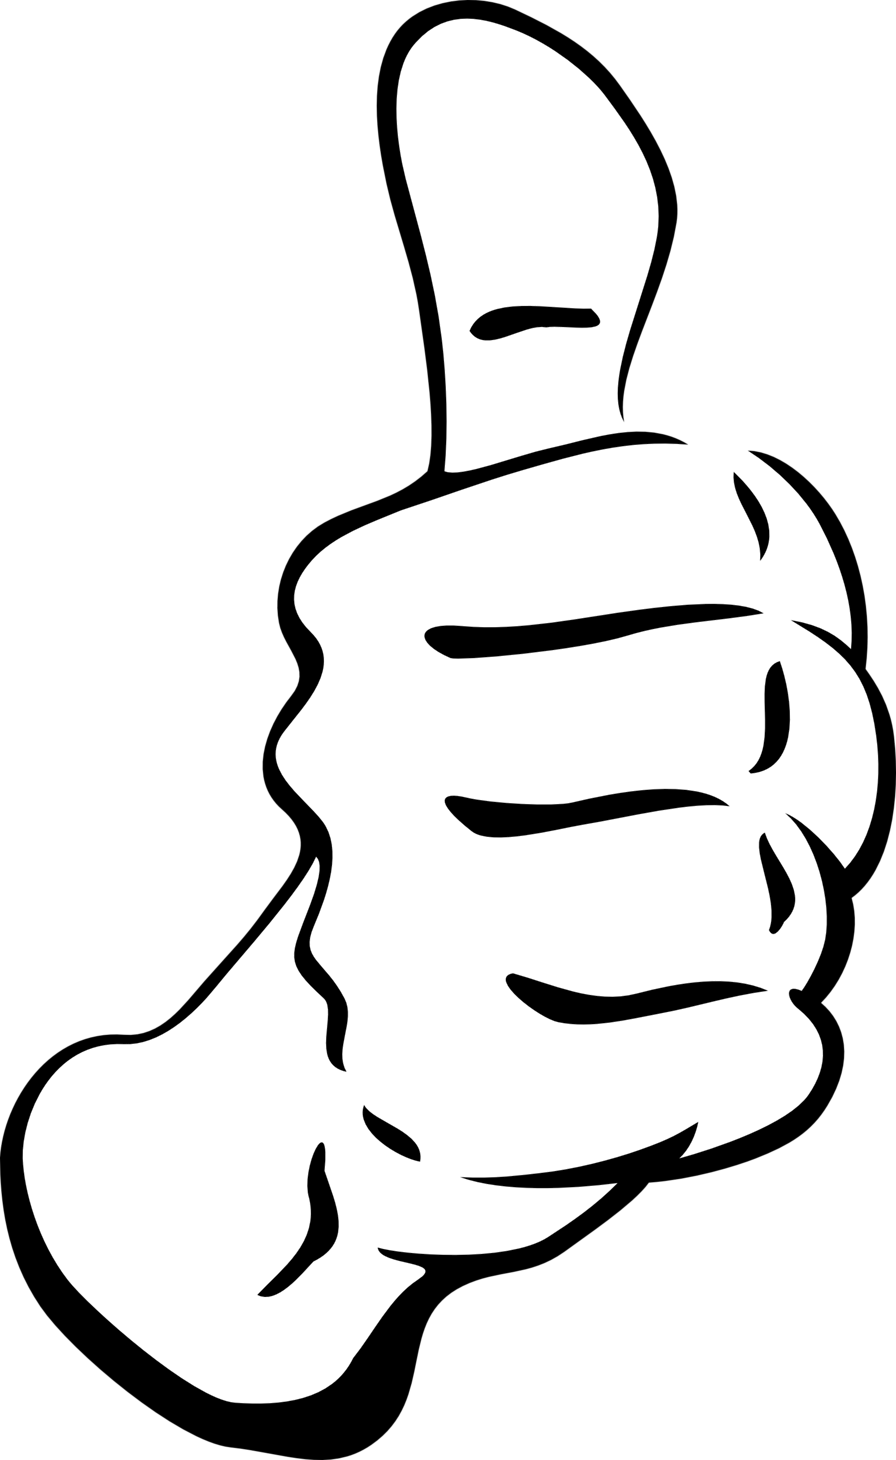 Free Thumbs Up Transparent, Download Free Clip Art, Free